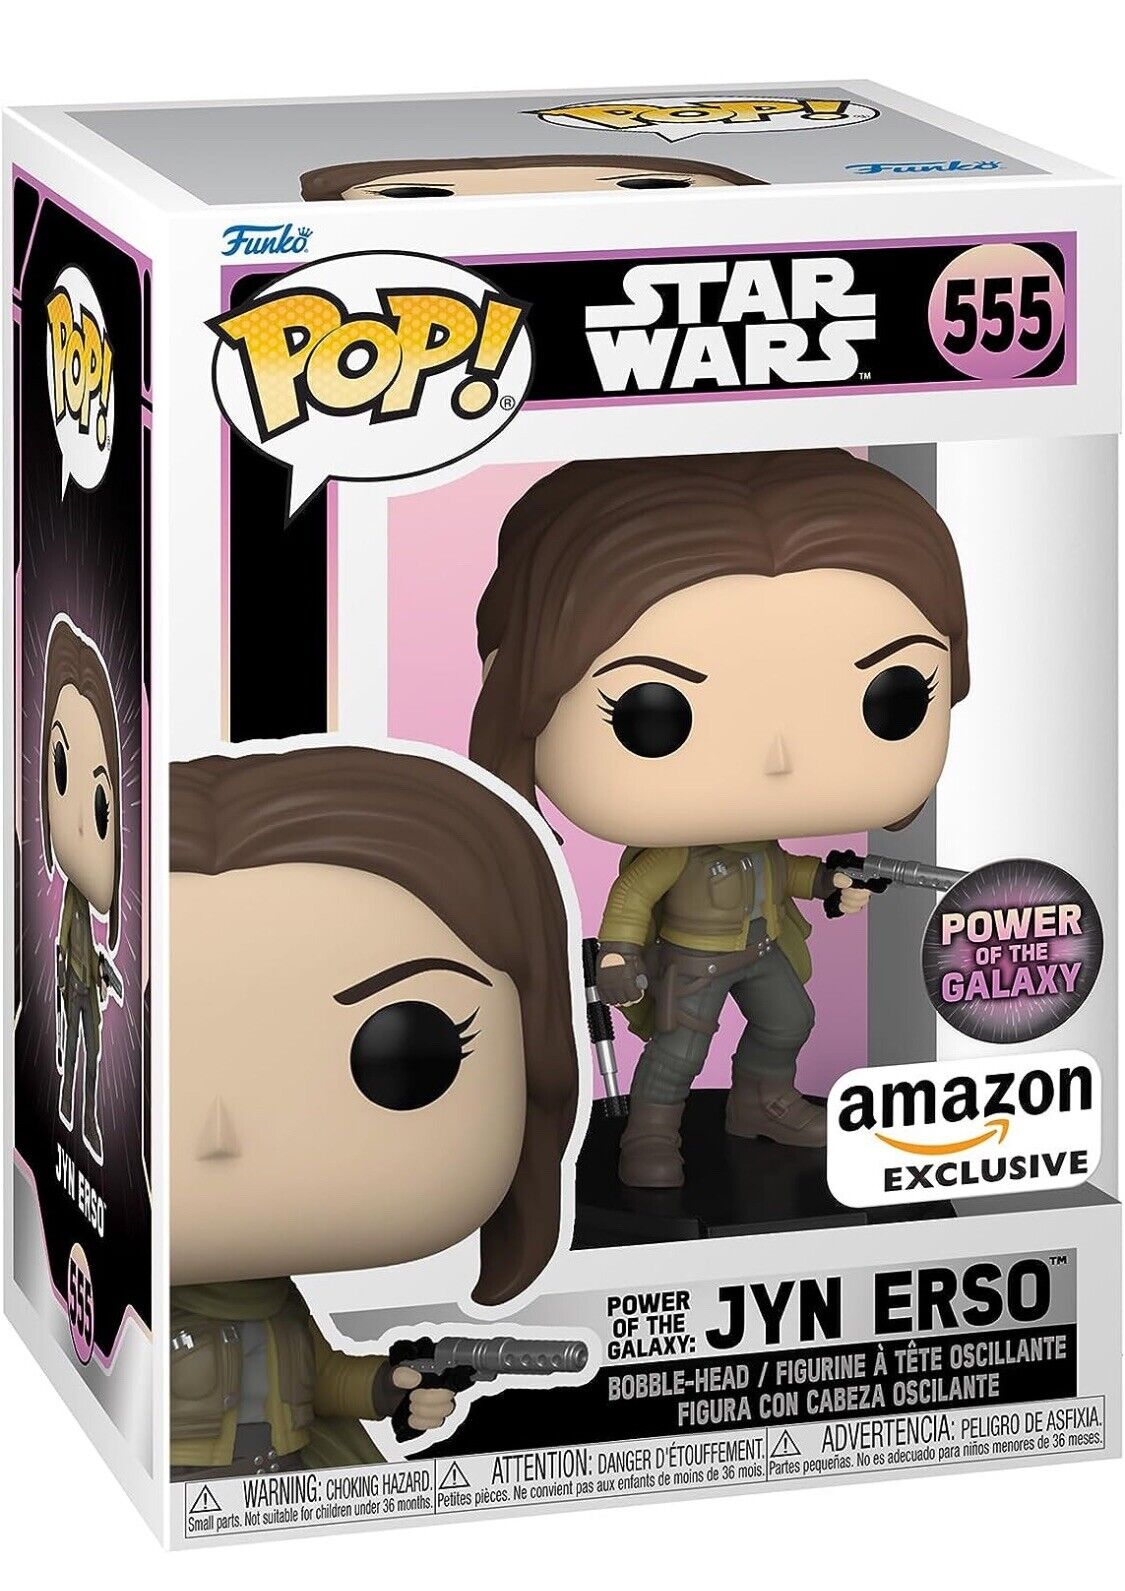 Funko Pop Star Wars Jyn Erso #555 Amazon Exclusive - Limited Edition